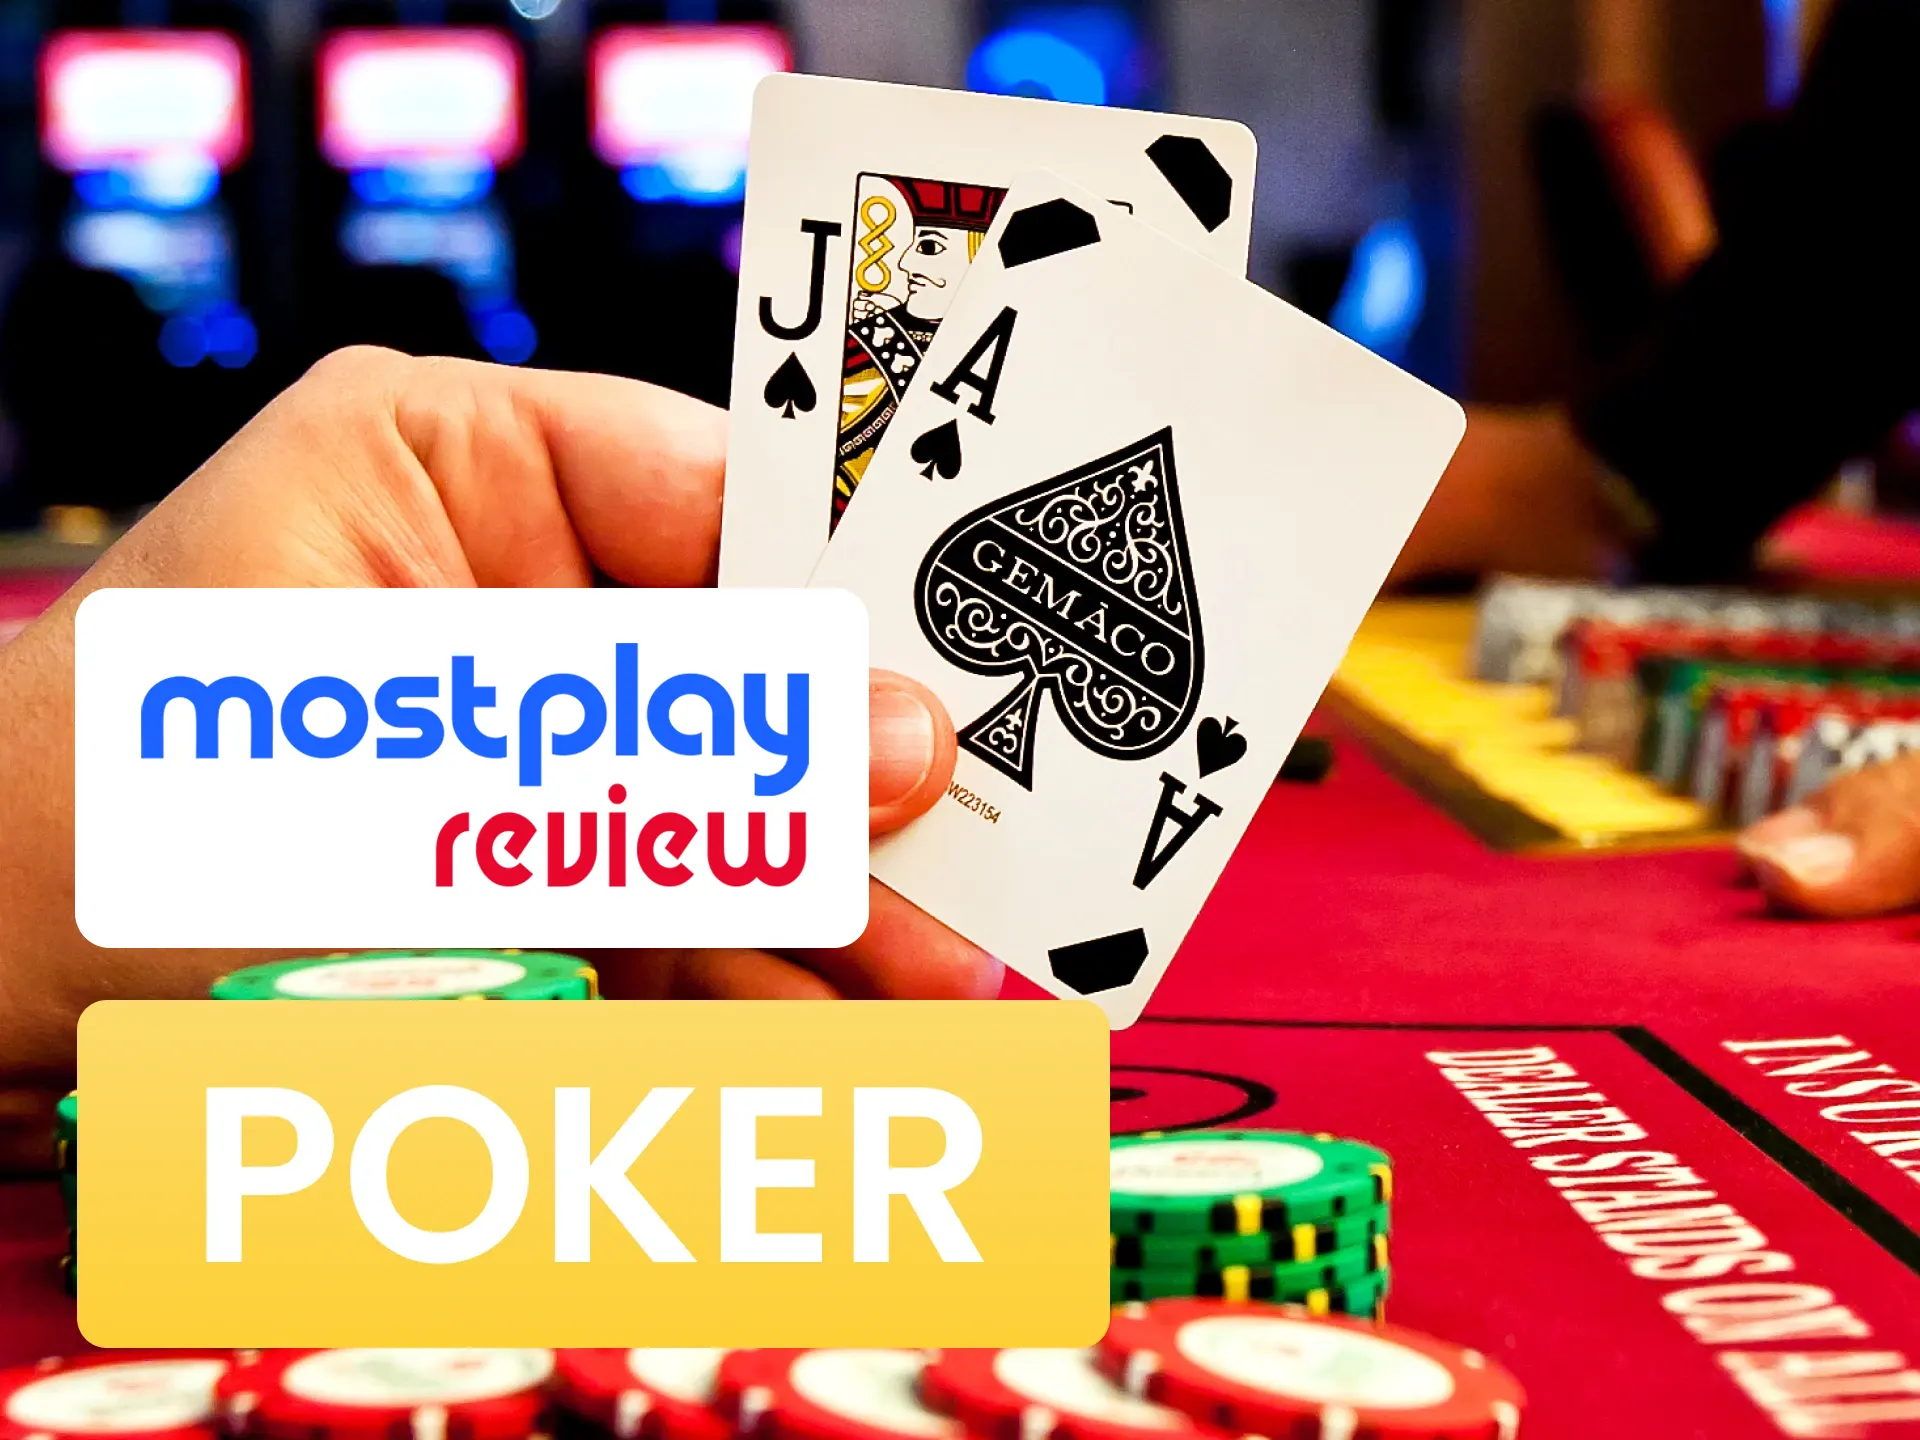 Play poker at Mostplay with real people.